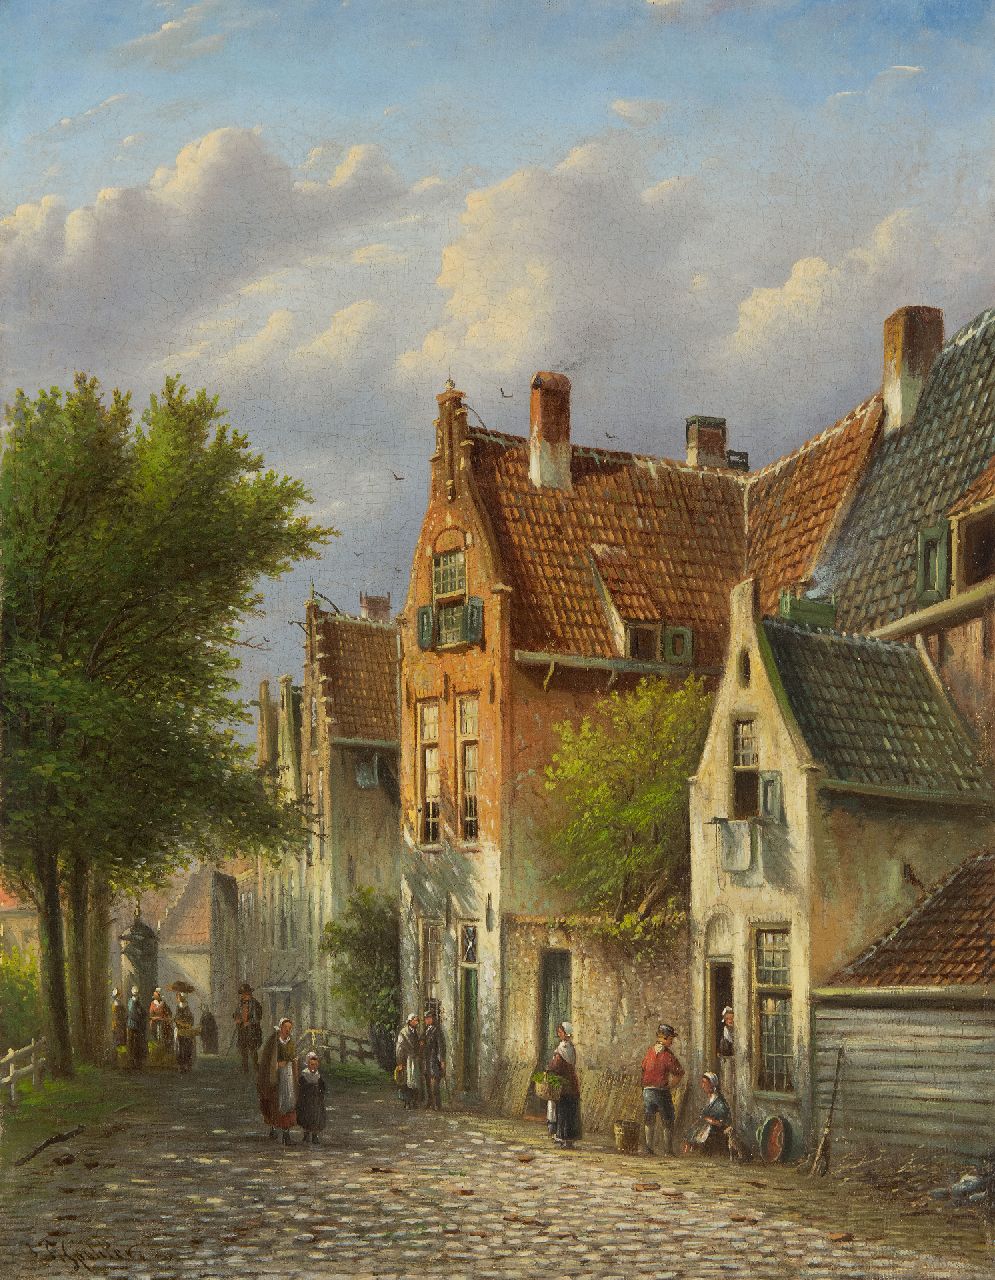 Spohler J.F.  | Johannes Franciscus Spohler | Paintings offered for sale | Activity in a Dutch street, oil on canvas 45.4 x 35.6 cm, signed l.l. and geen lijst